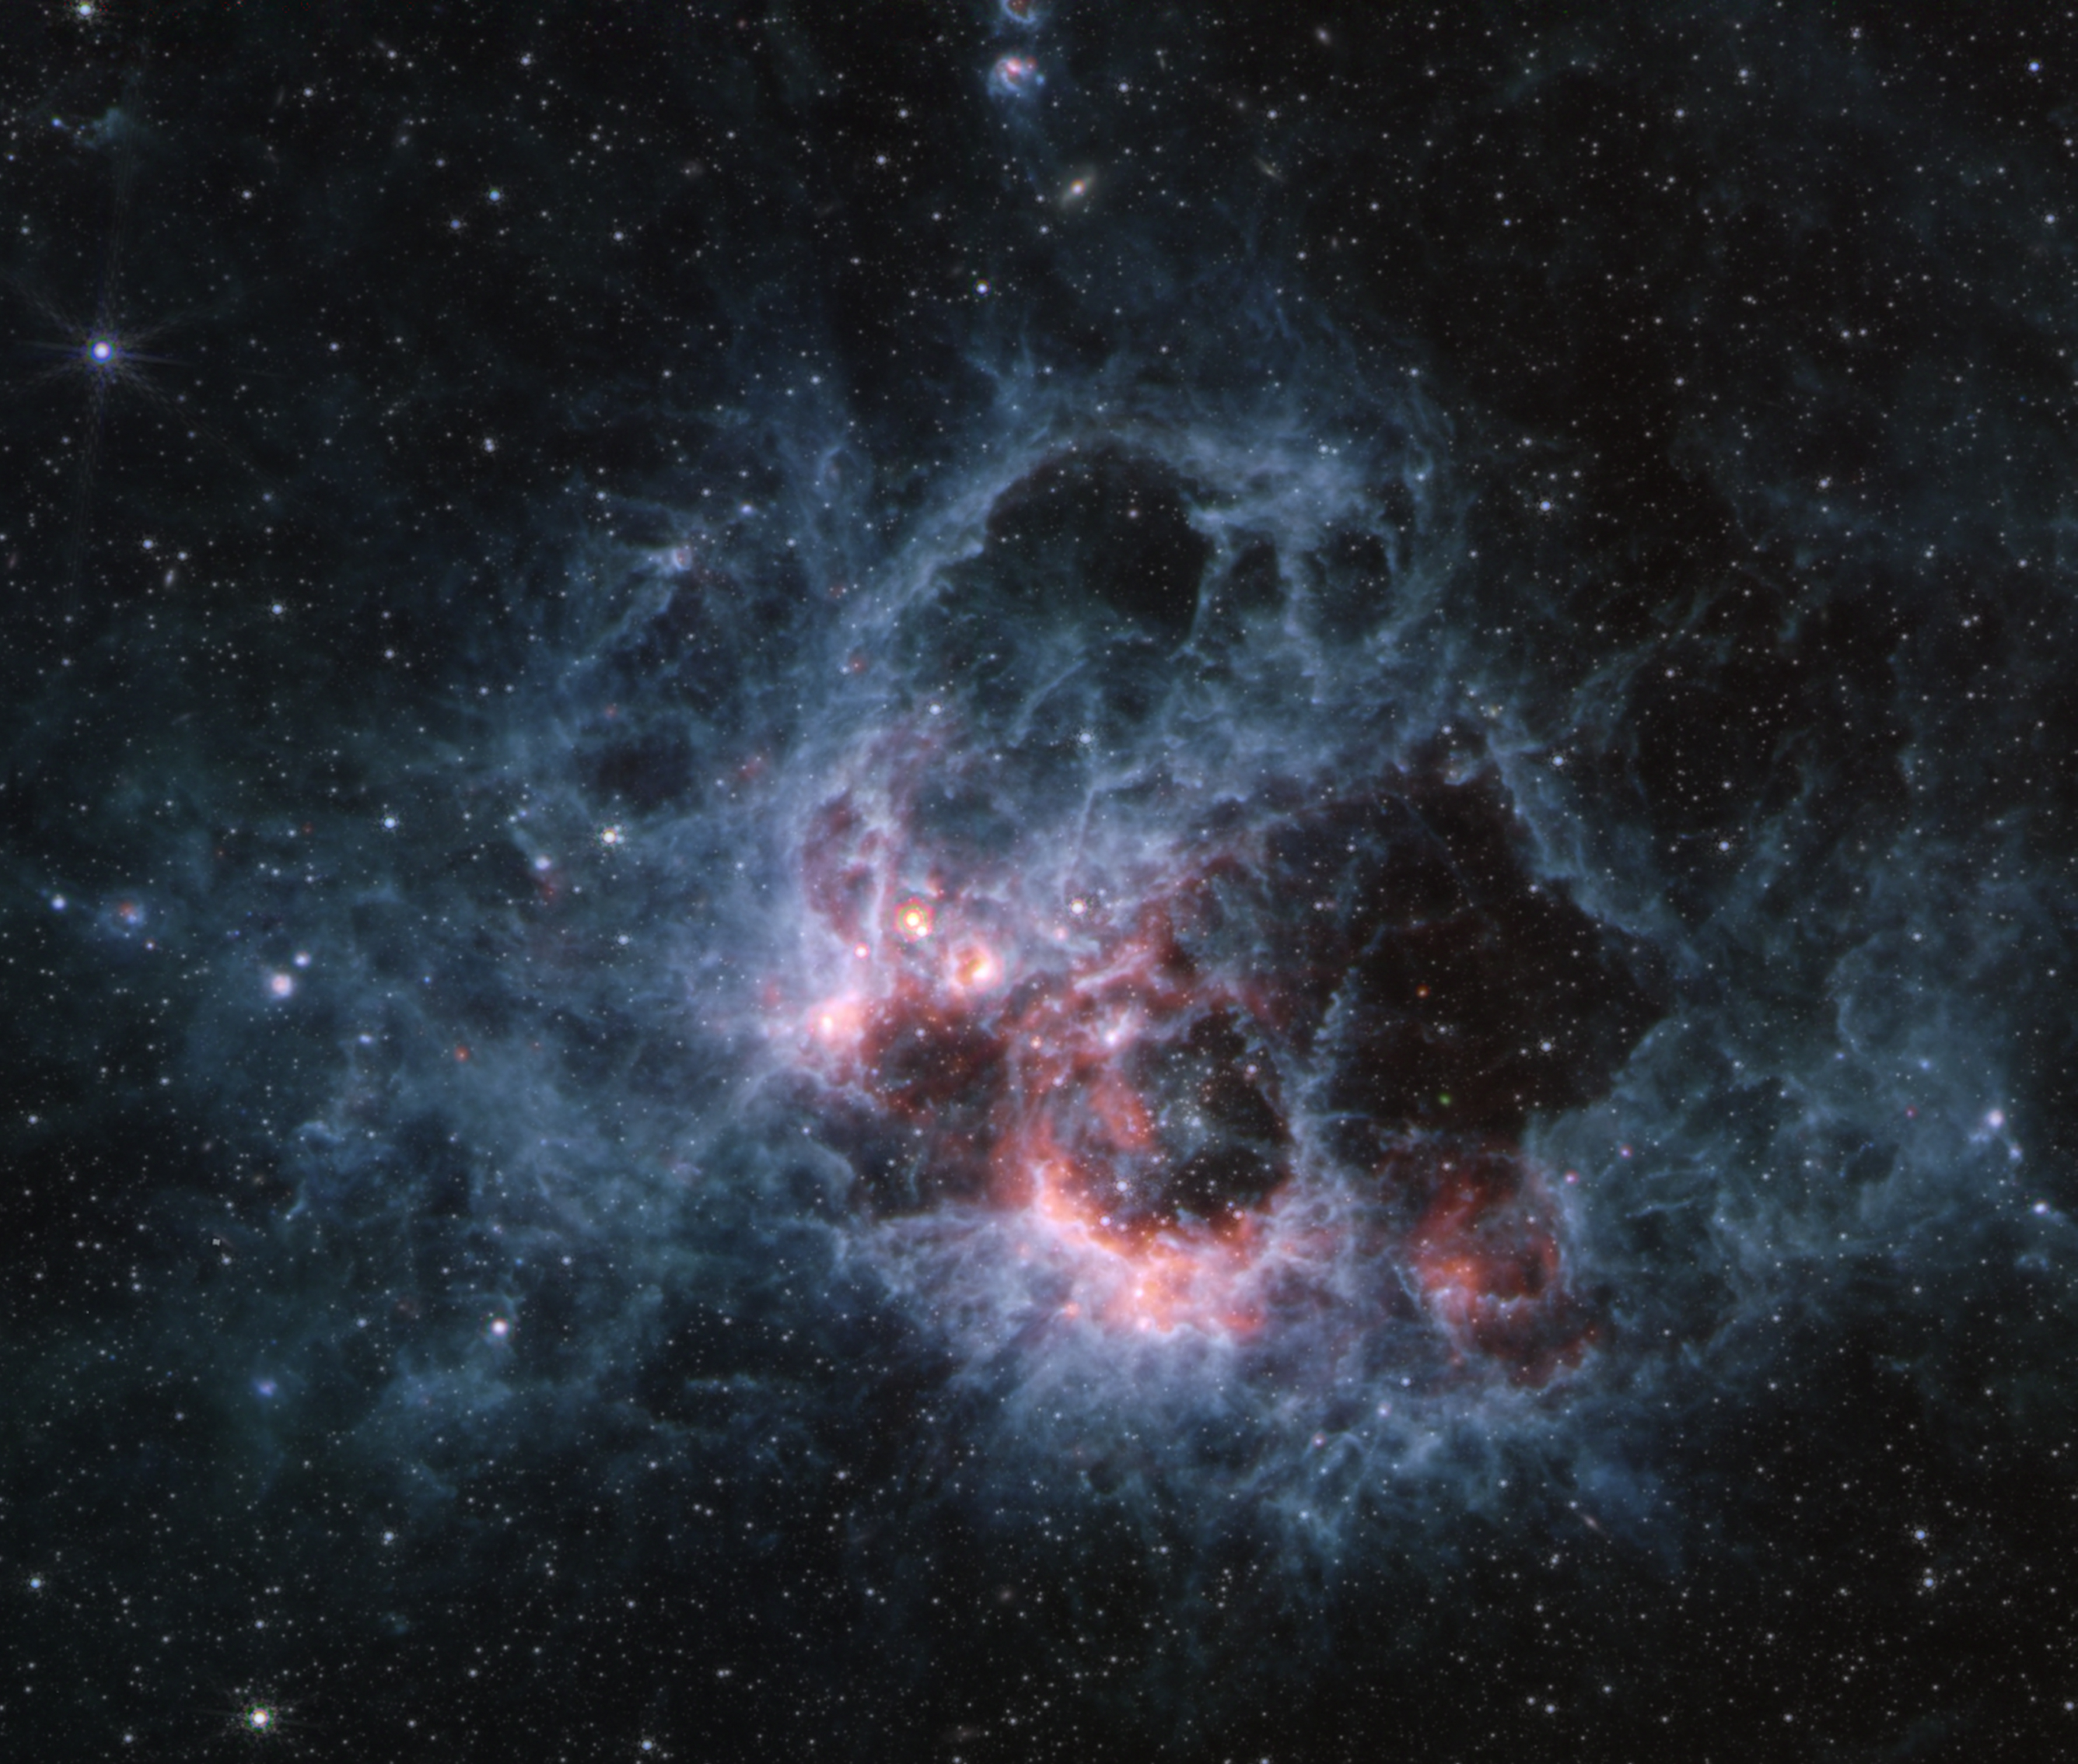 At the center of the image is a nebula on the black background of space. The nebula is comprised of wispy filaments of light blue clouds. At the center-right of the blue clouds is a large cavernous bubble. The bottom left edge of this cavernous bubble is filled with hues of pink and white gas. There are several other smaller cavernous bubbles at the top of the nebula, including two tiny cavities at the top center of the image. There are hundreds of dim stars that fill the surrounding area of the nebula.